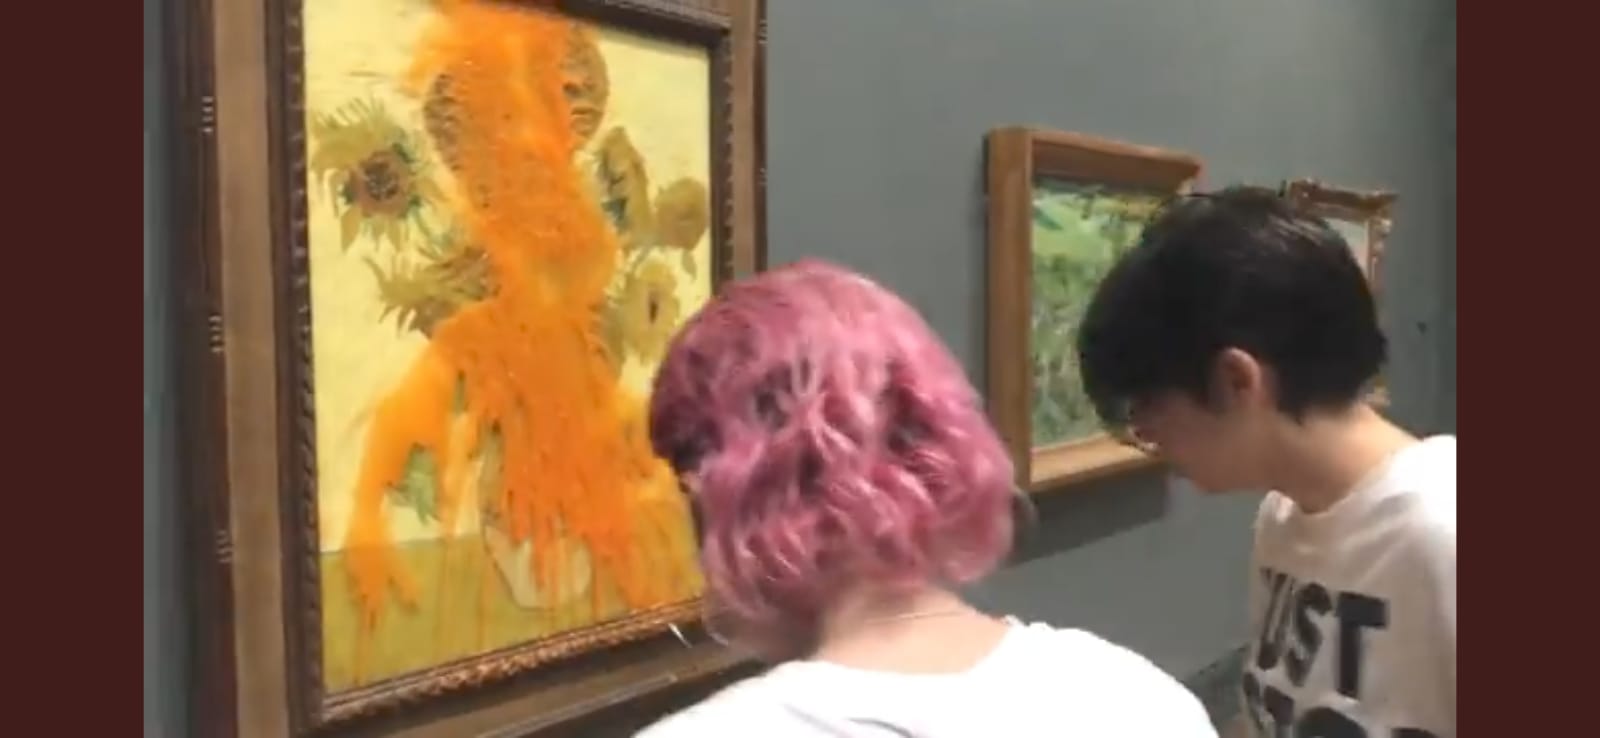 What is Just Stop Oil, green group that threw tomato soup on Van Goghs Sunflowers?